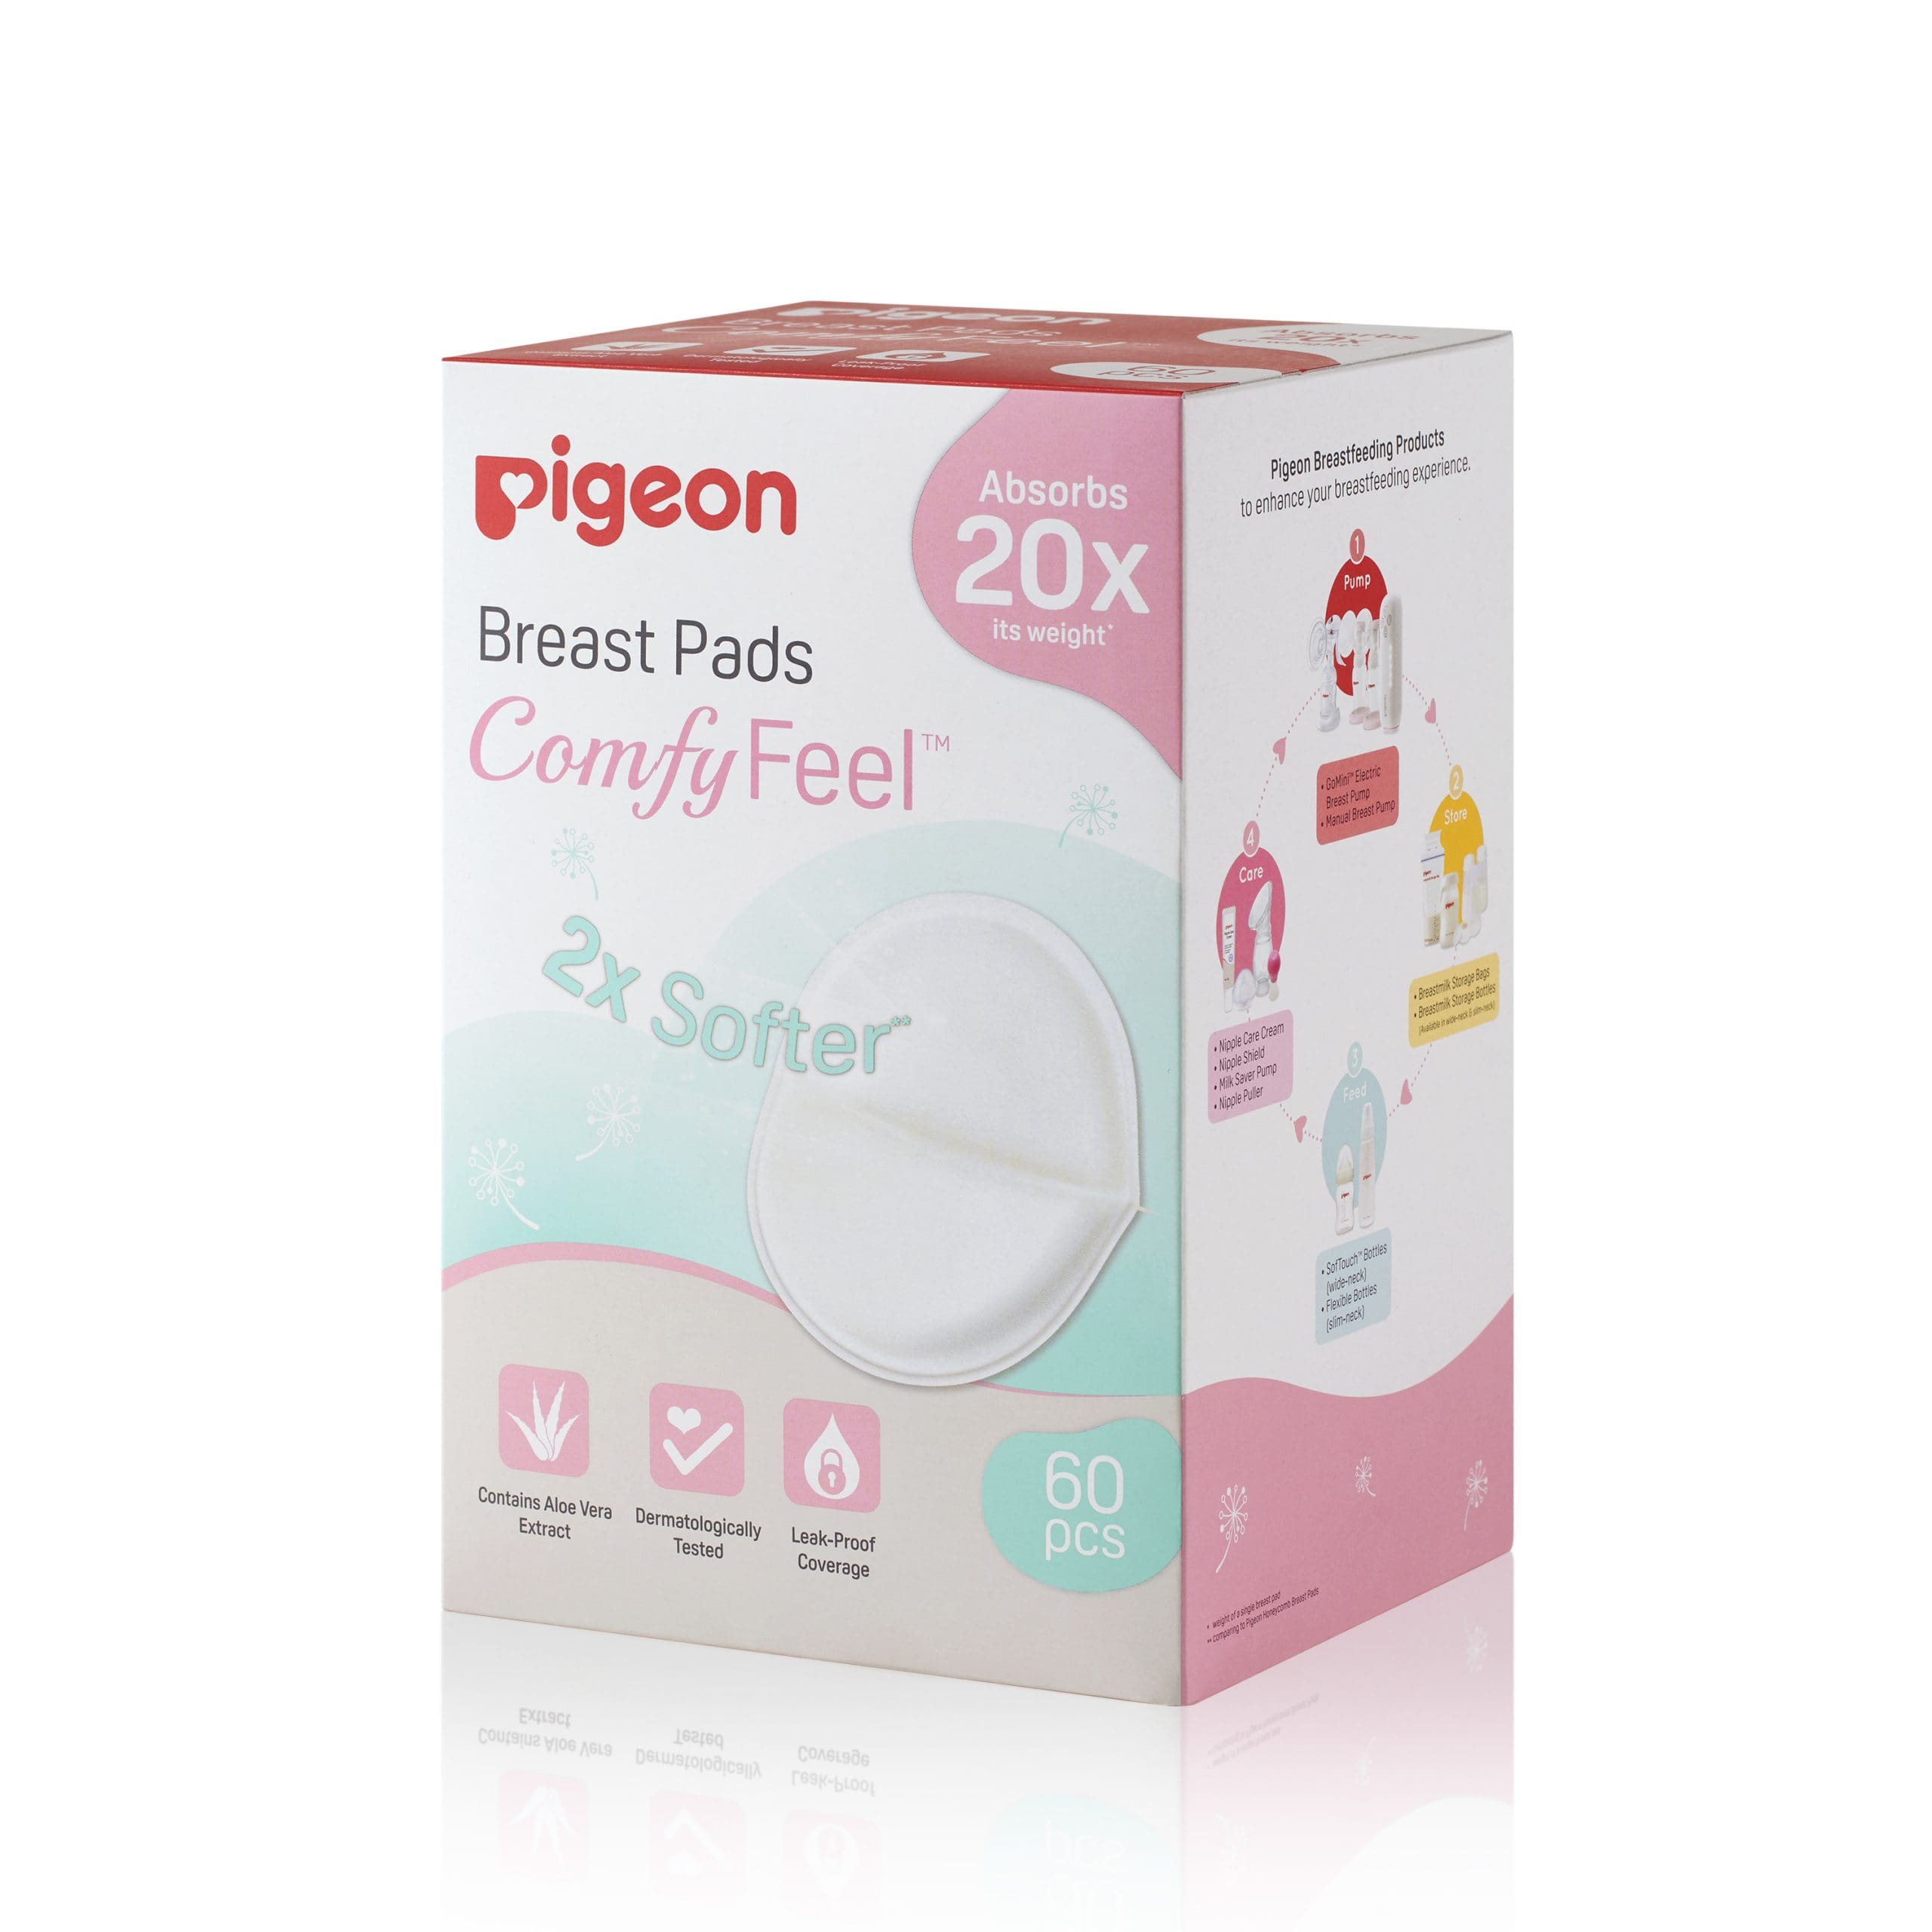 Pigeon Disposable Nursing Pads for Breastfeeding, Contains Aloe